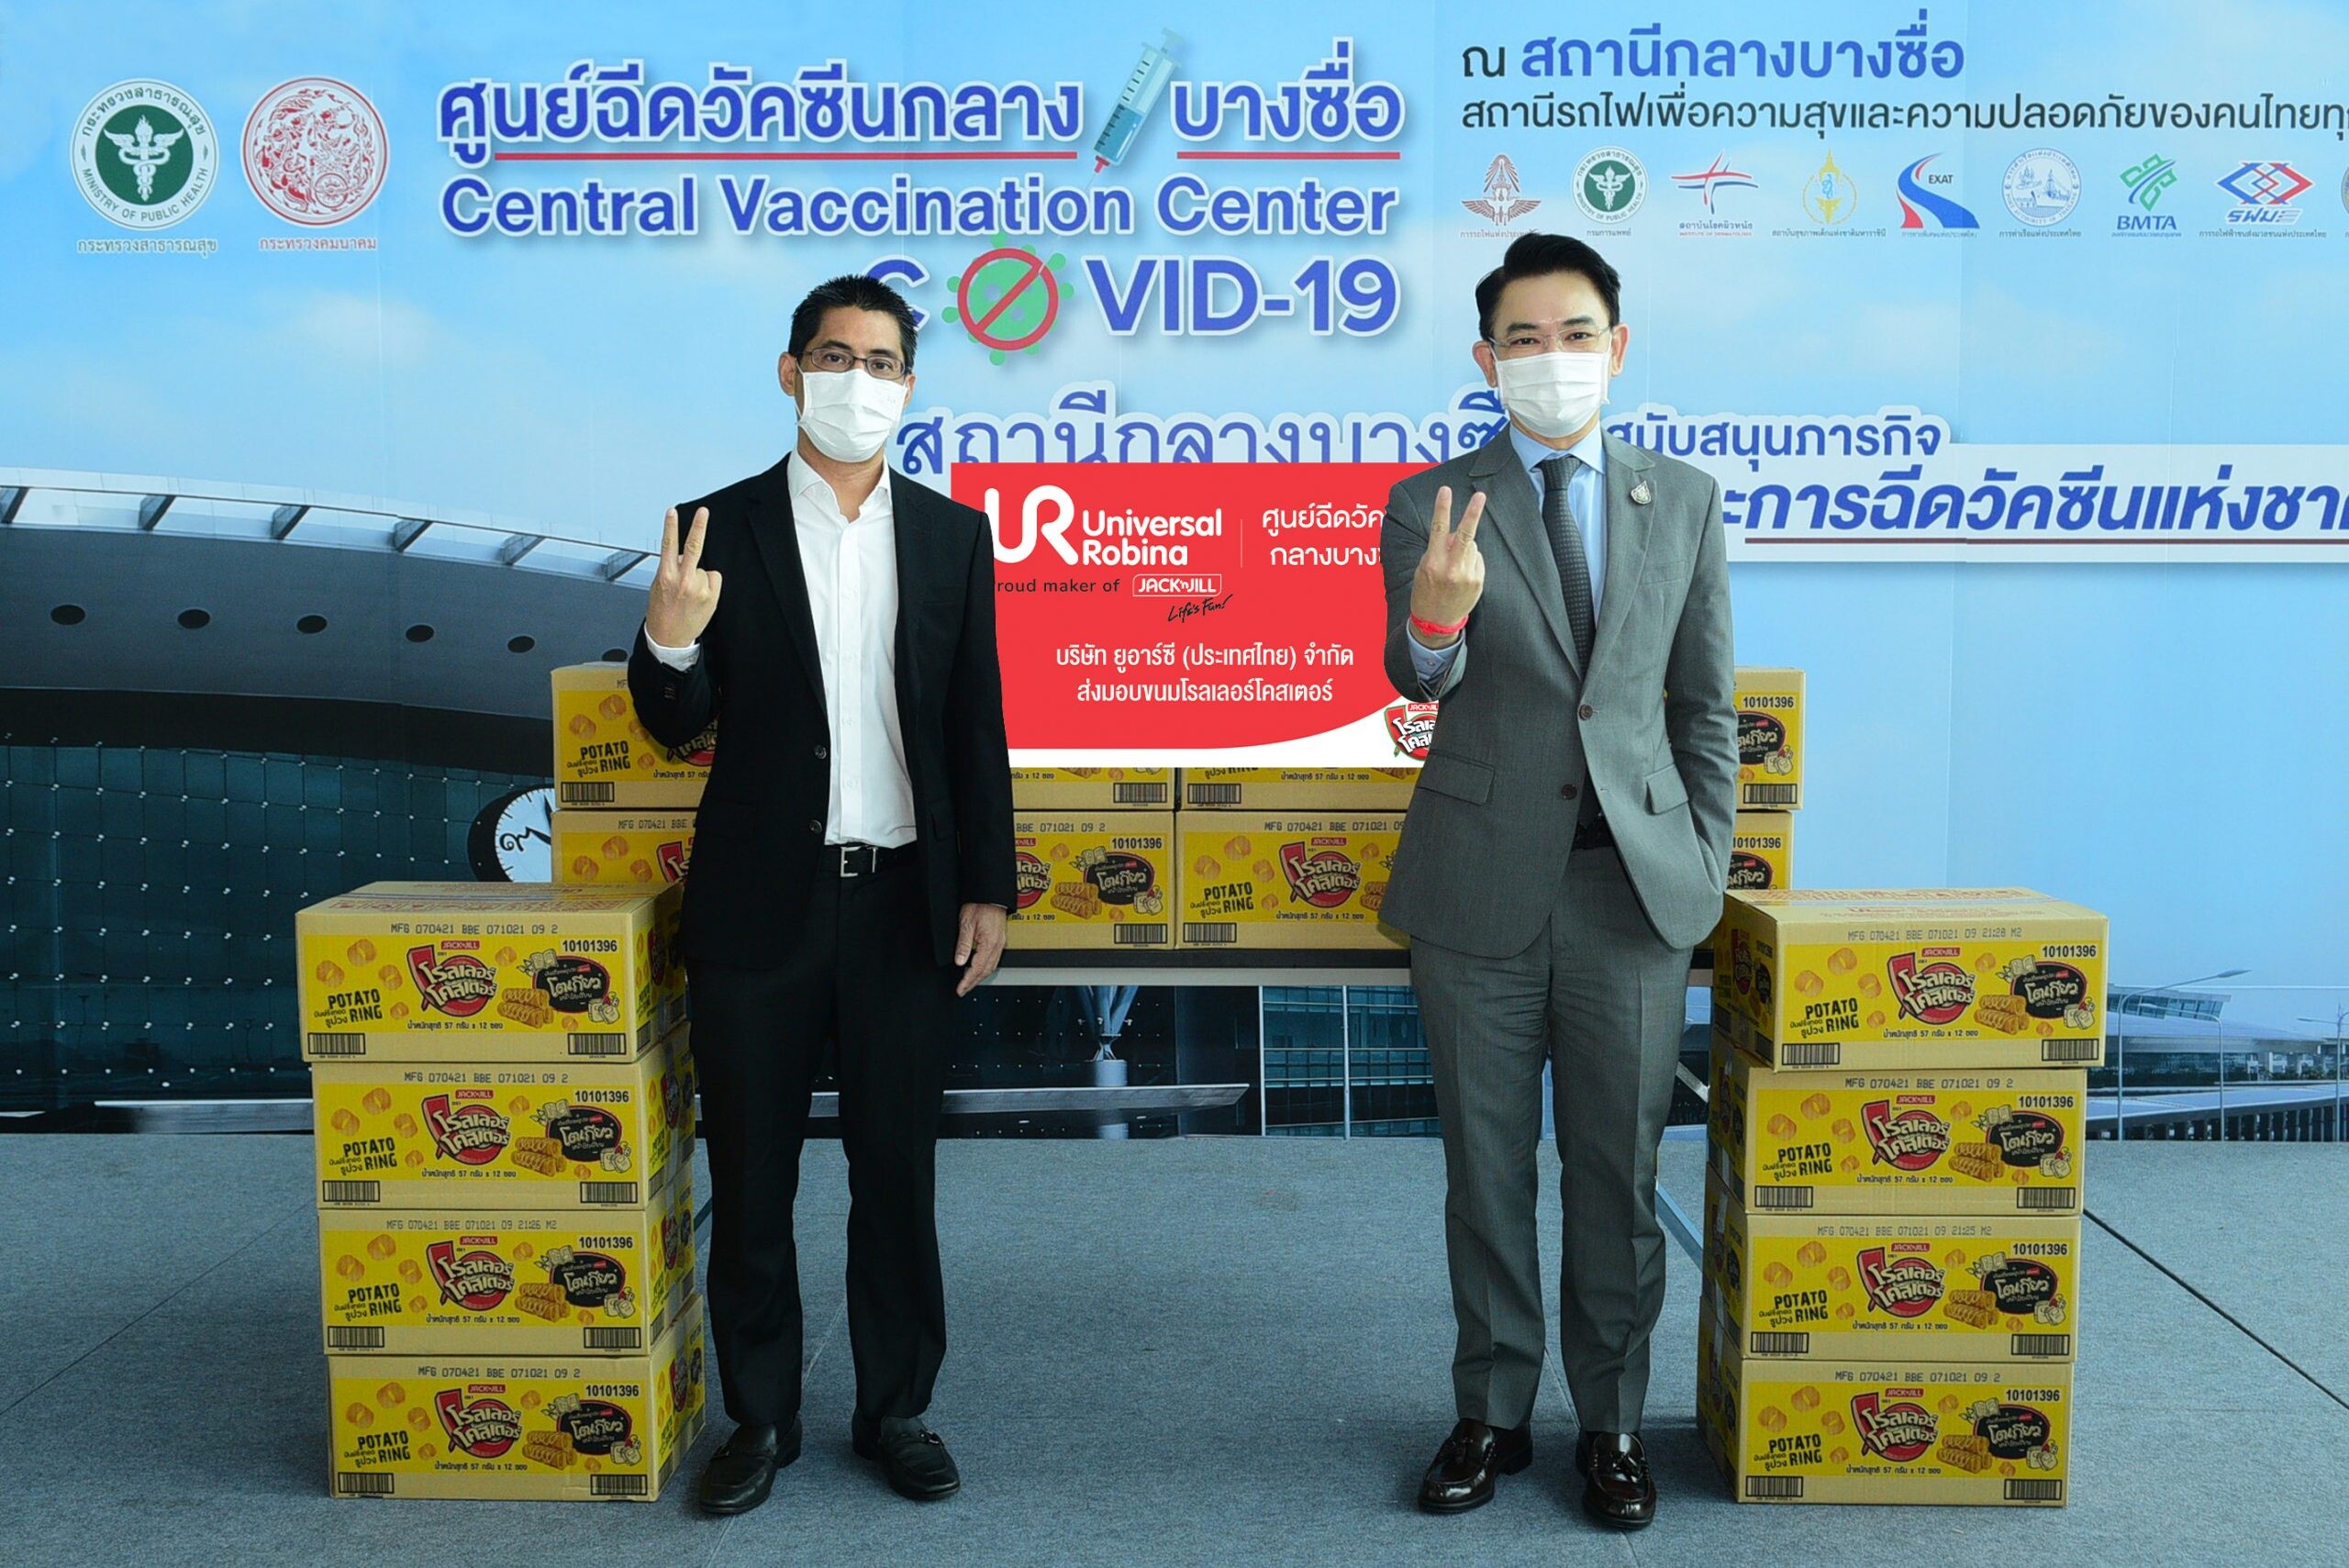 URC Thailand brings snacks to medical frontliners and people receiving vaccines to fight COVID-19